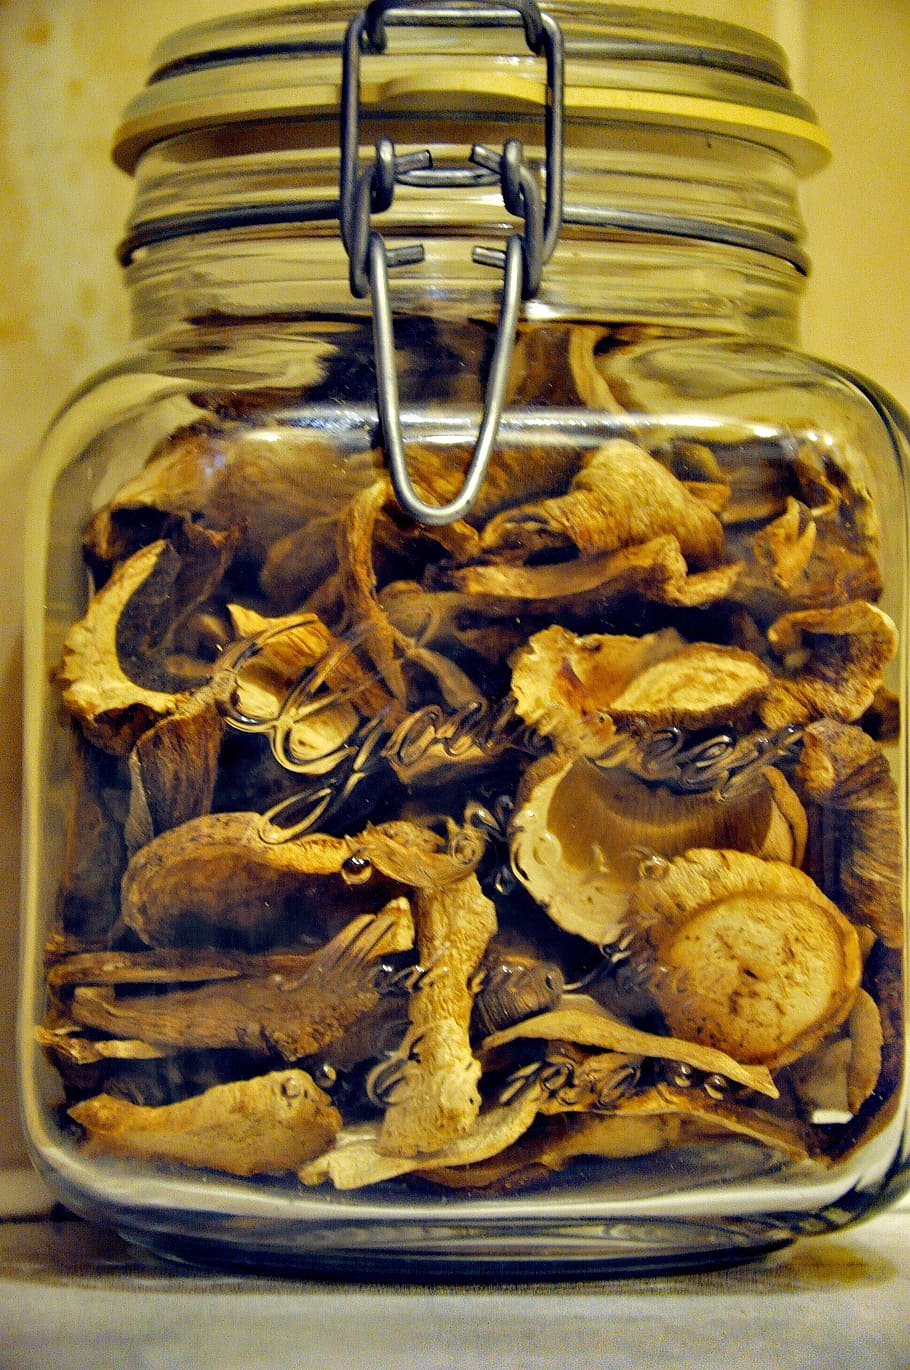 mushrooms, bank, clarity, yellow light, dry, dryness, indoors, food, food and drink, close-up